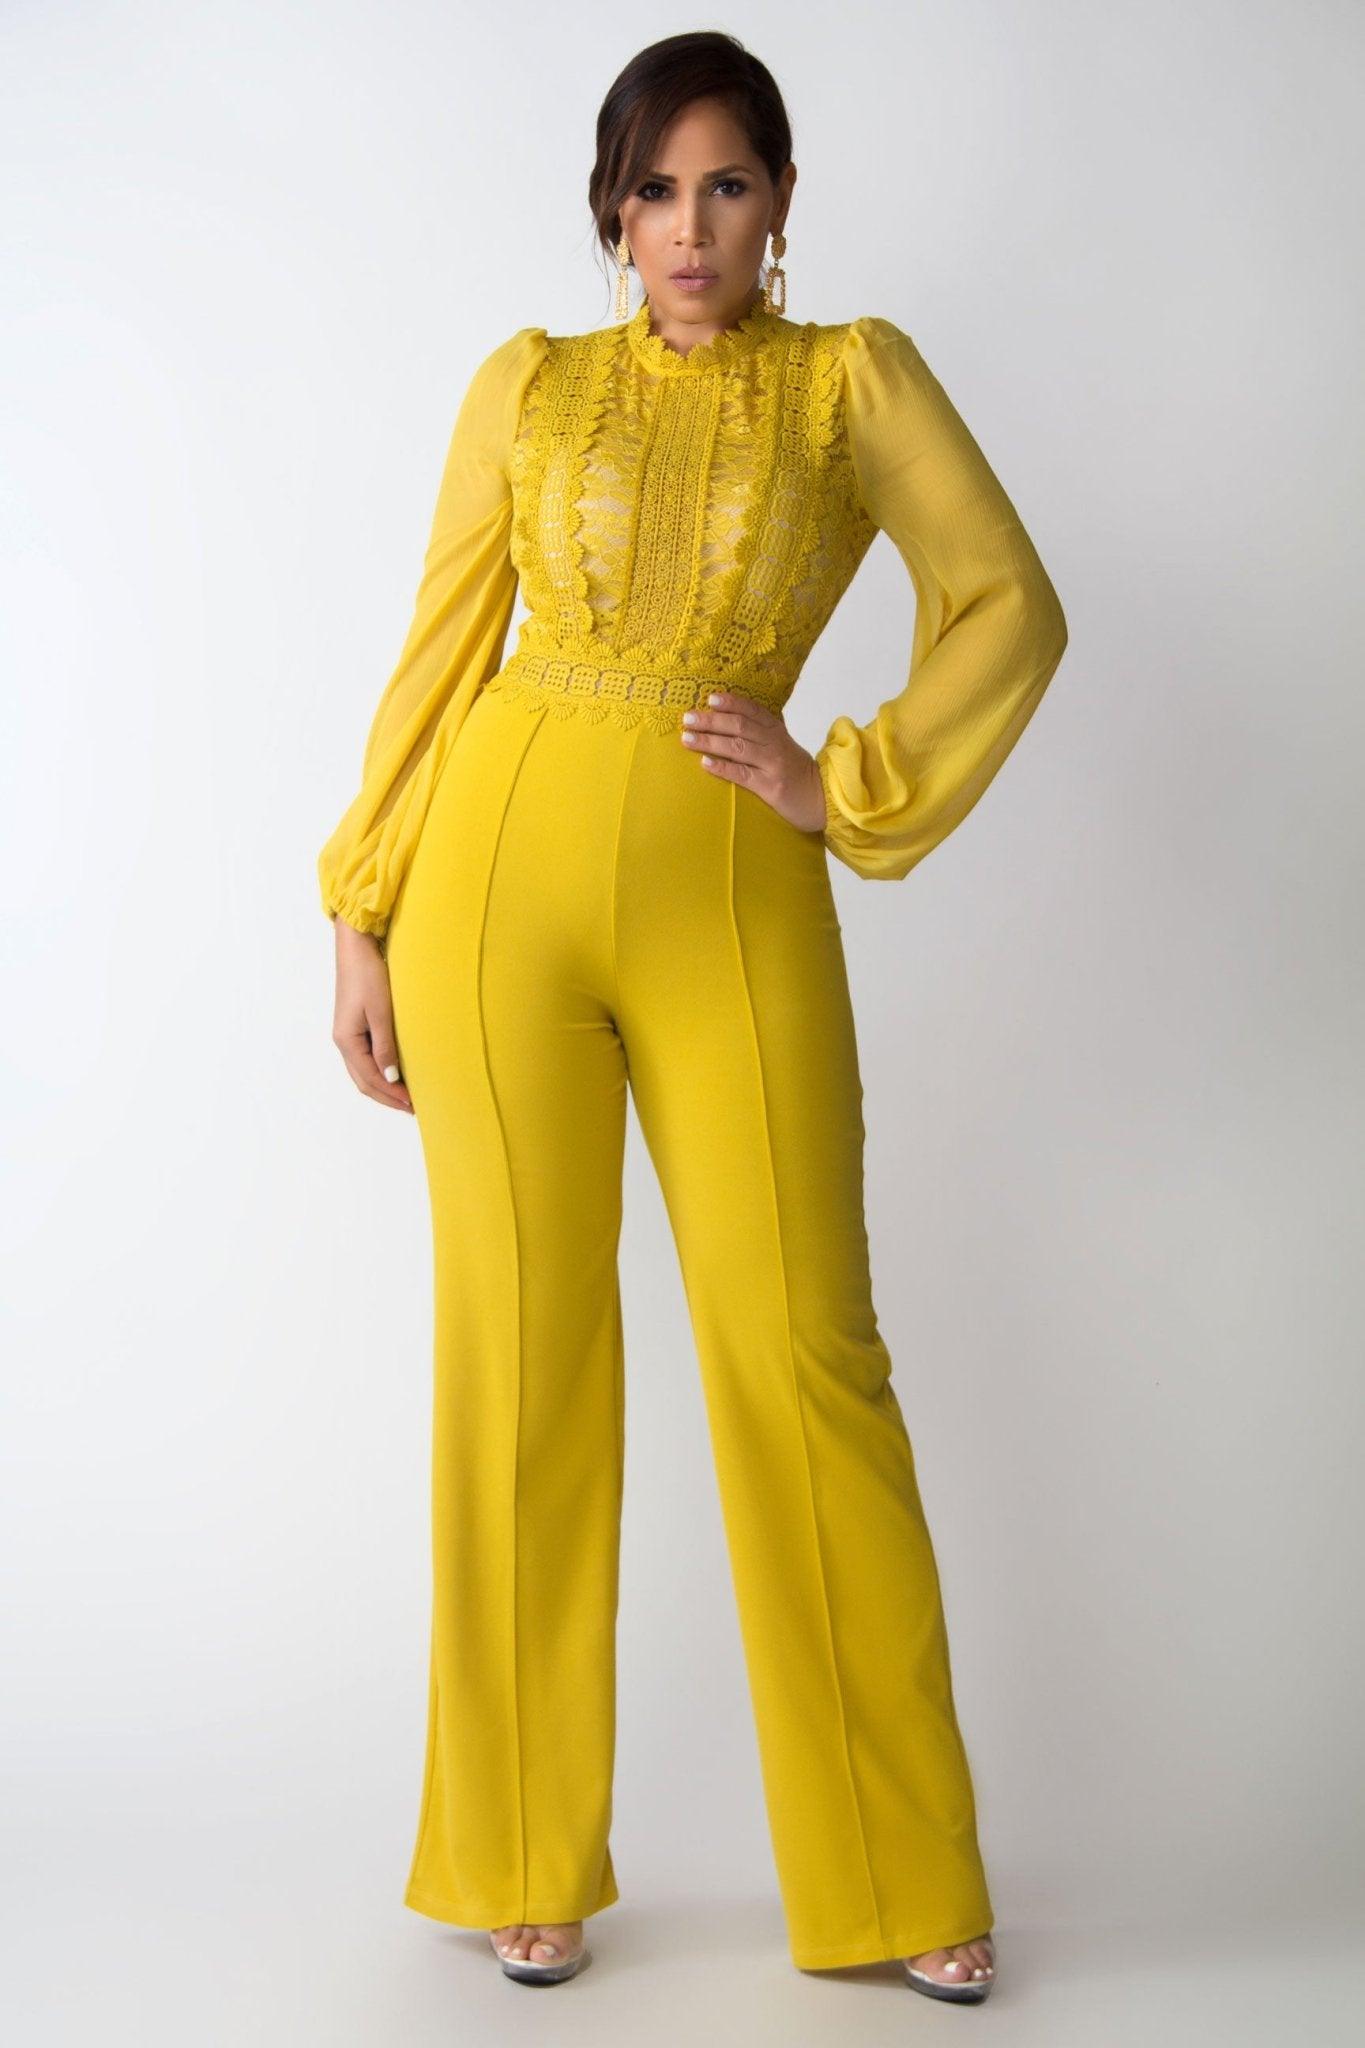 Brielle Lace Long Sleeves Boutique Jumpsuit - MY SEXY STYLES